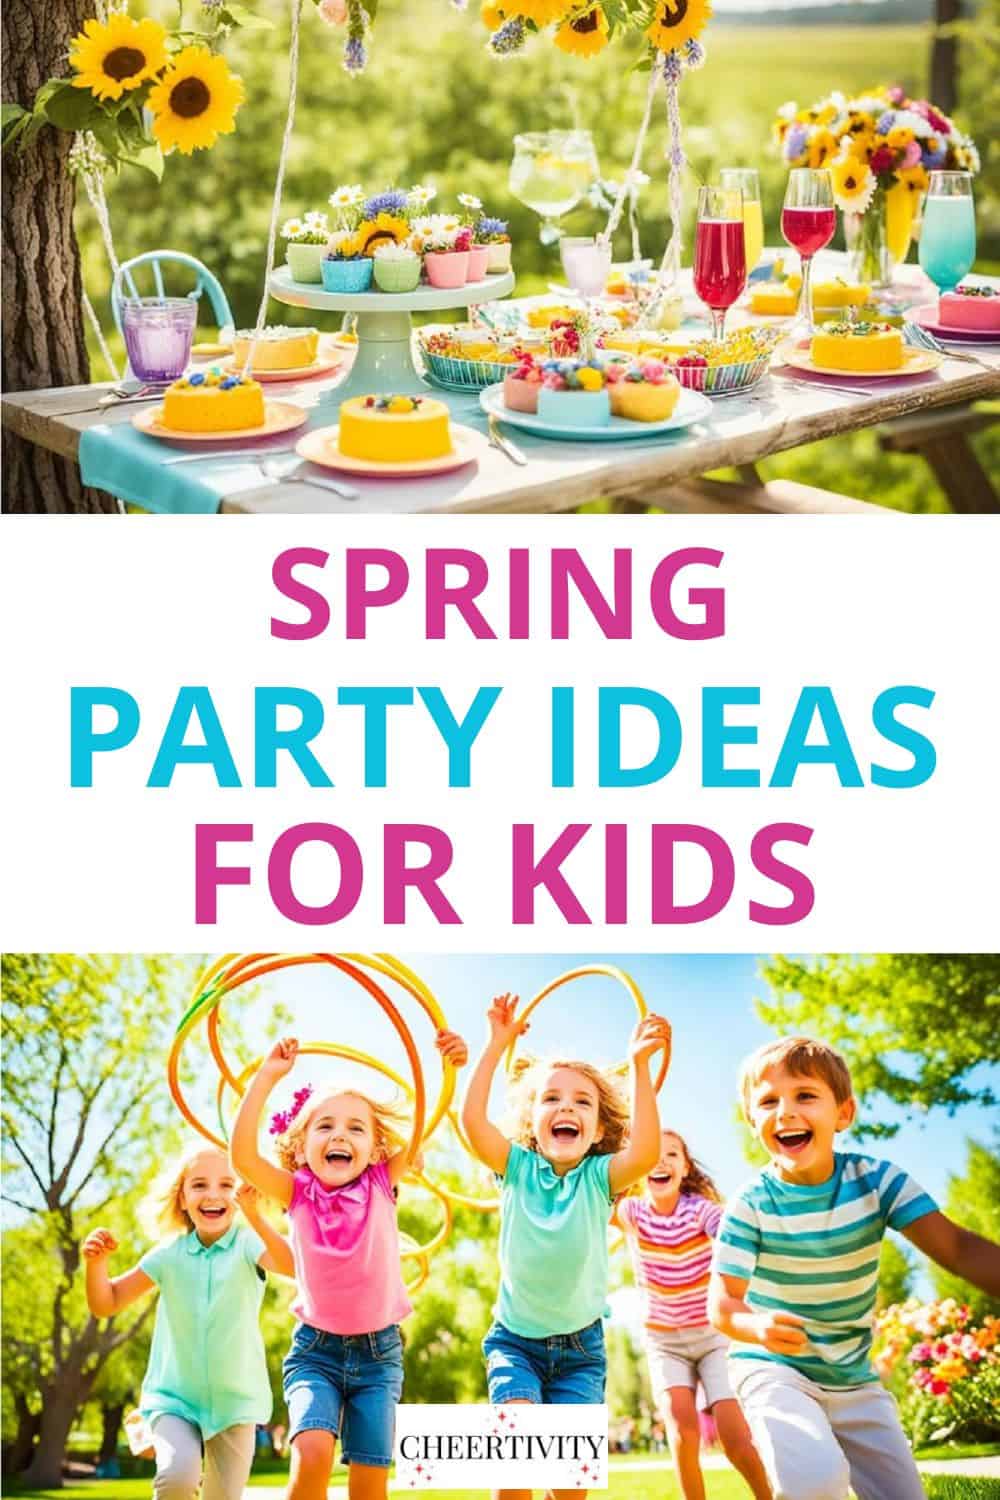 Spring Party Ideas for Kids